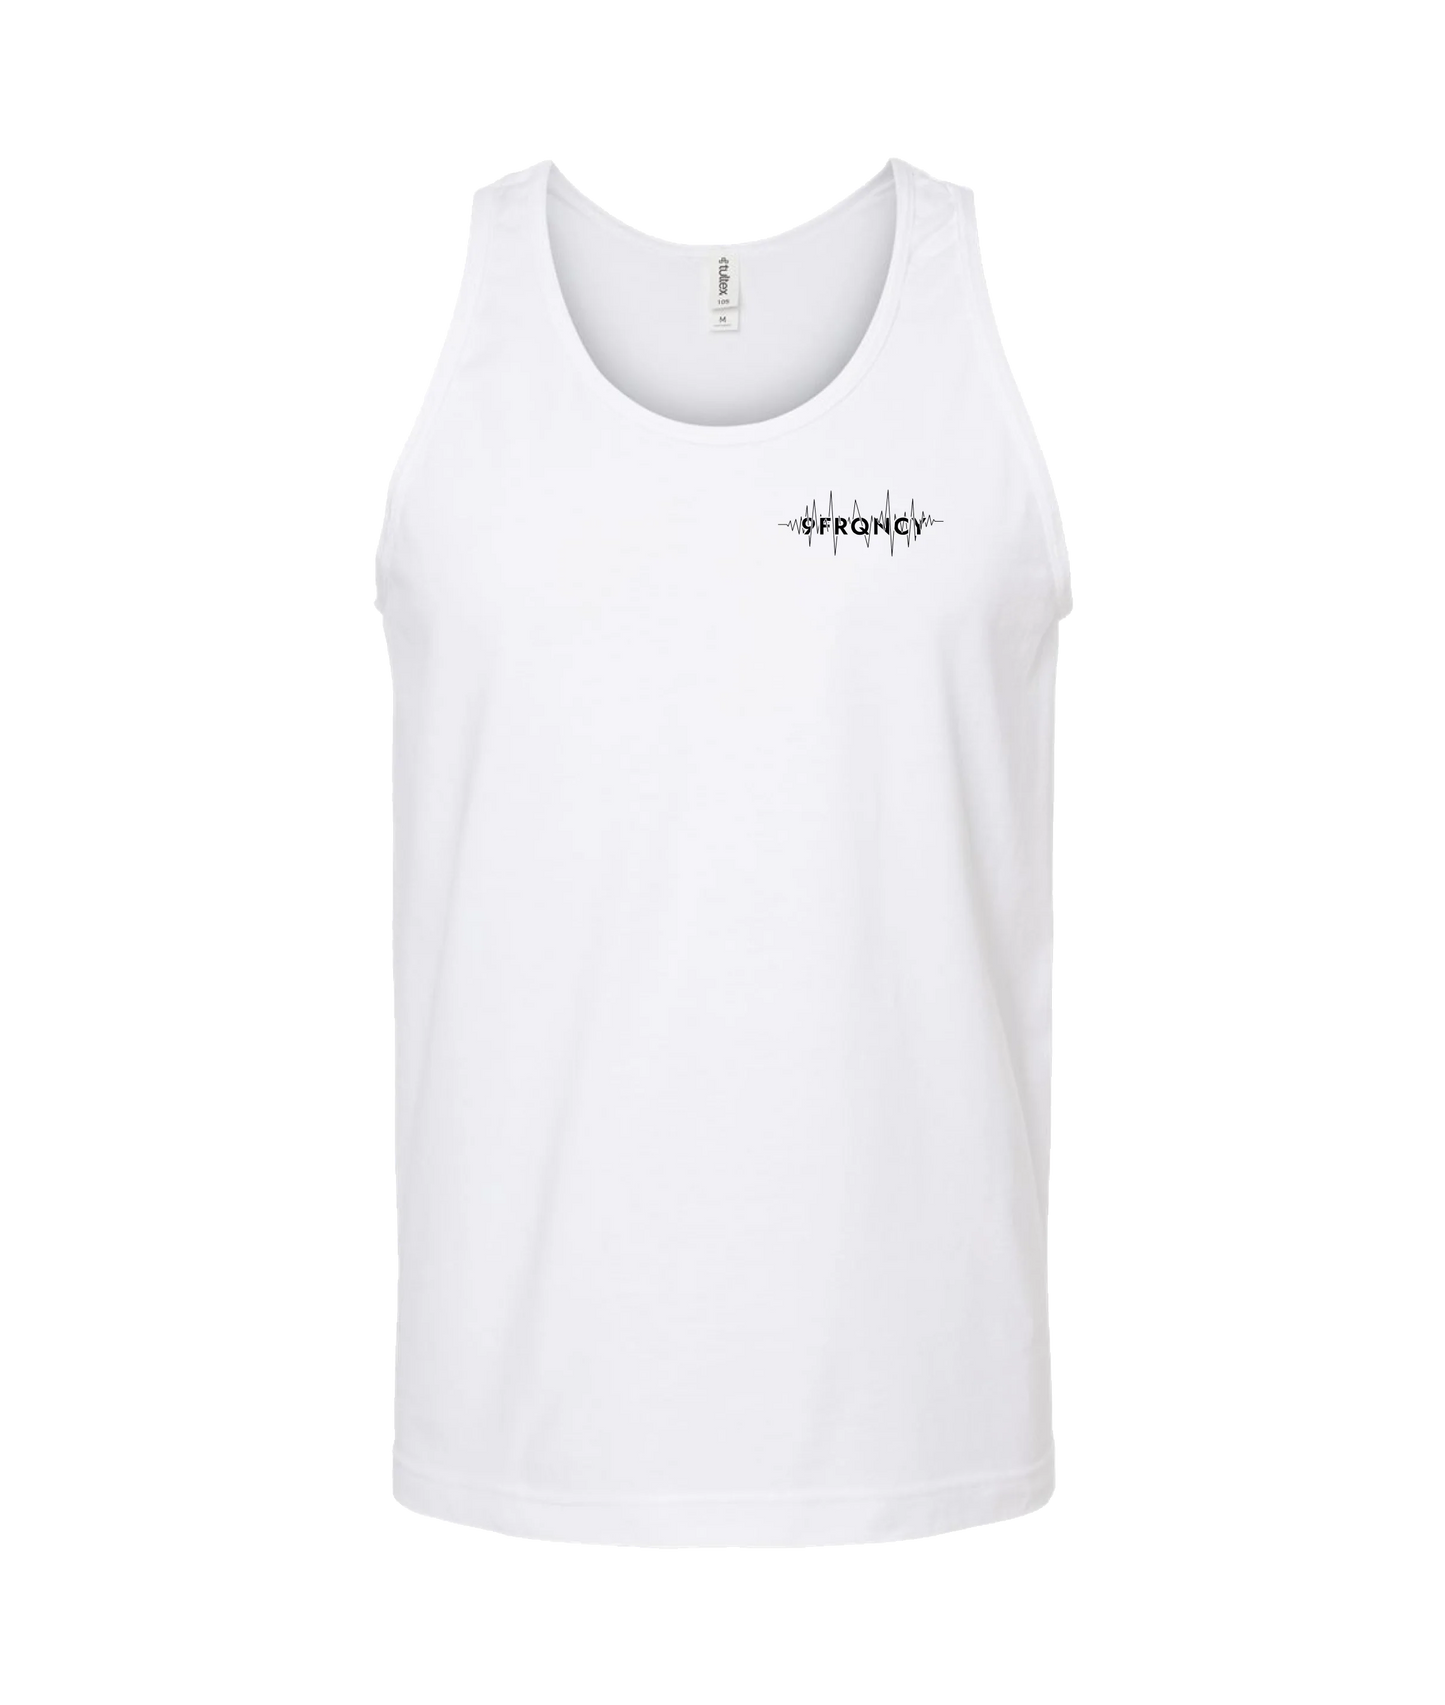 9frequency
 - Logo - White Tank Top